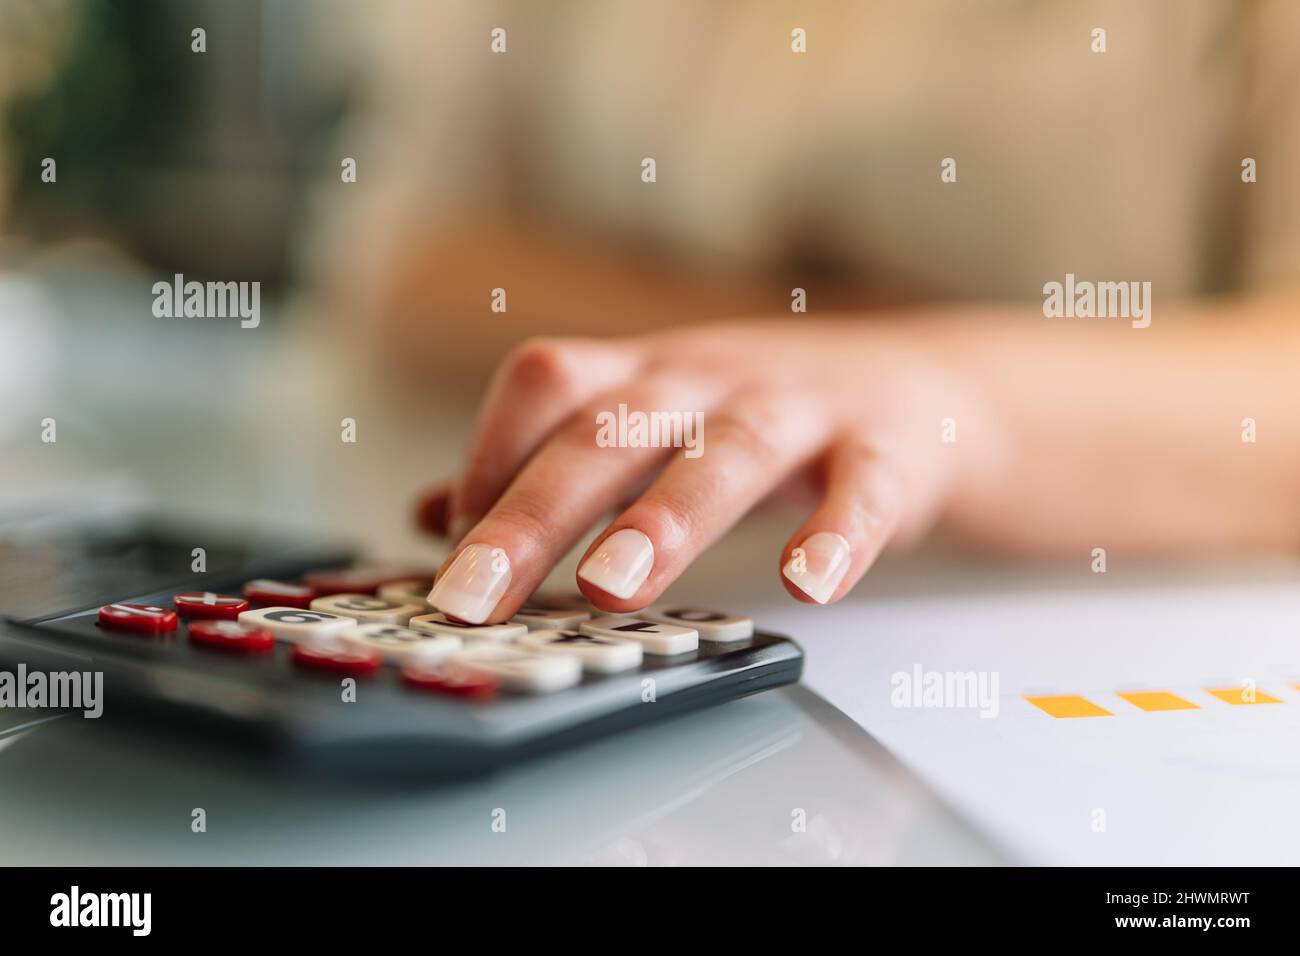 Young girl using a calculator at the office Stock Photo